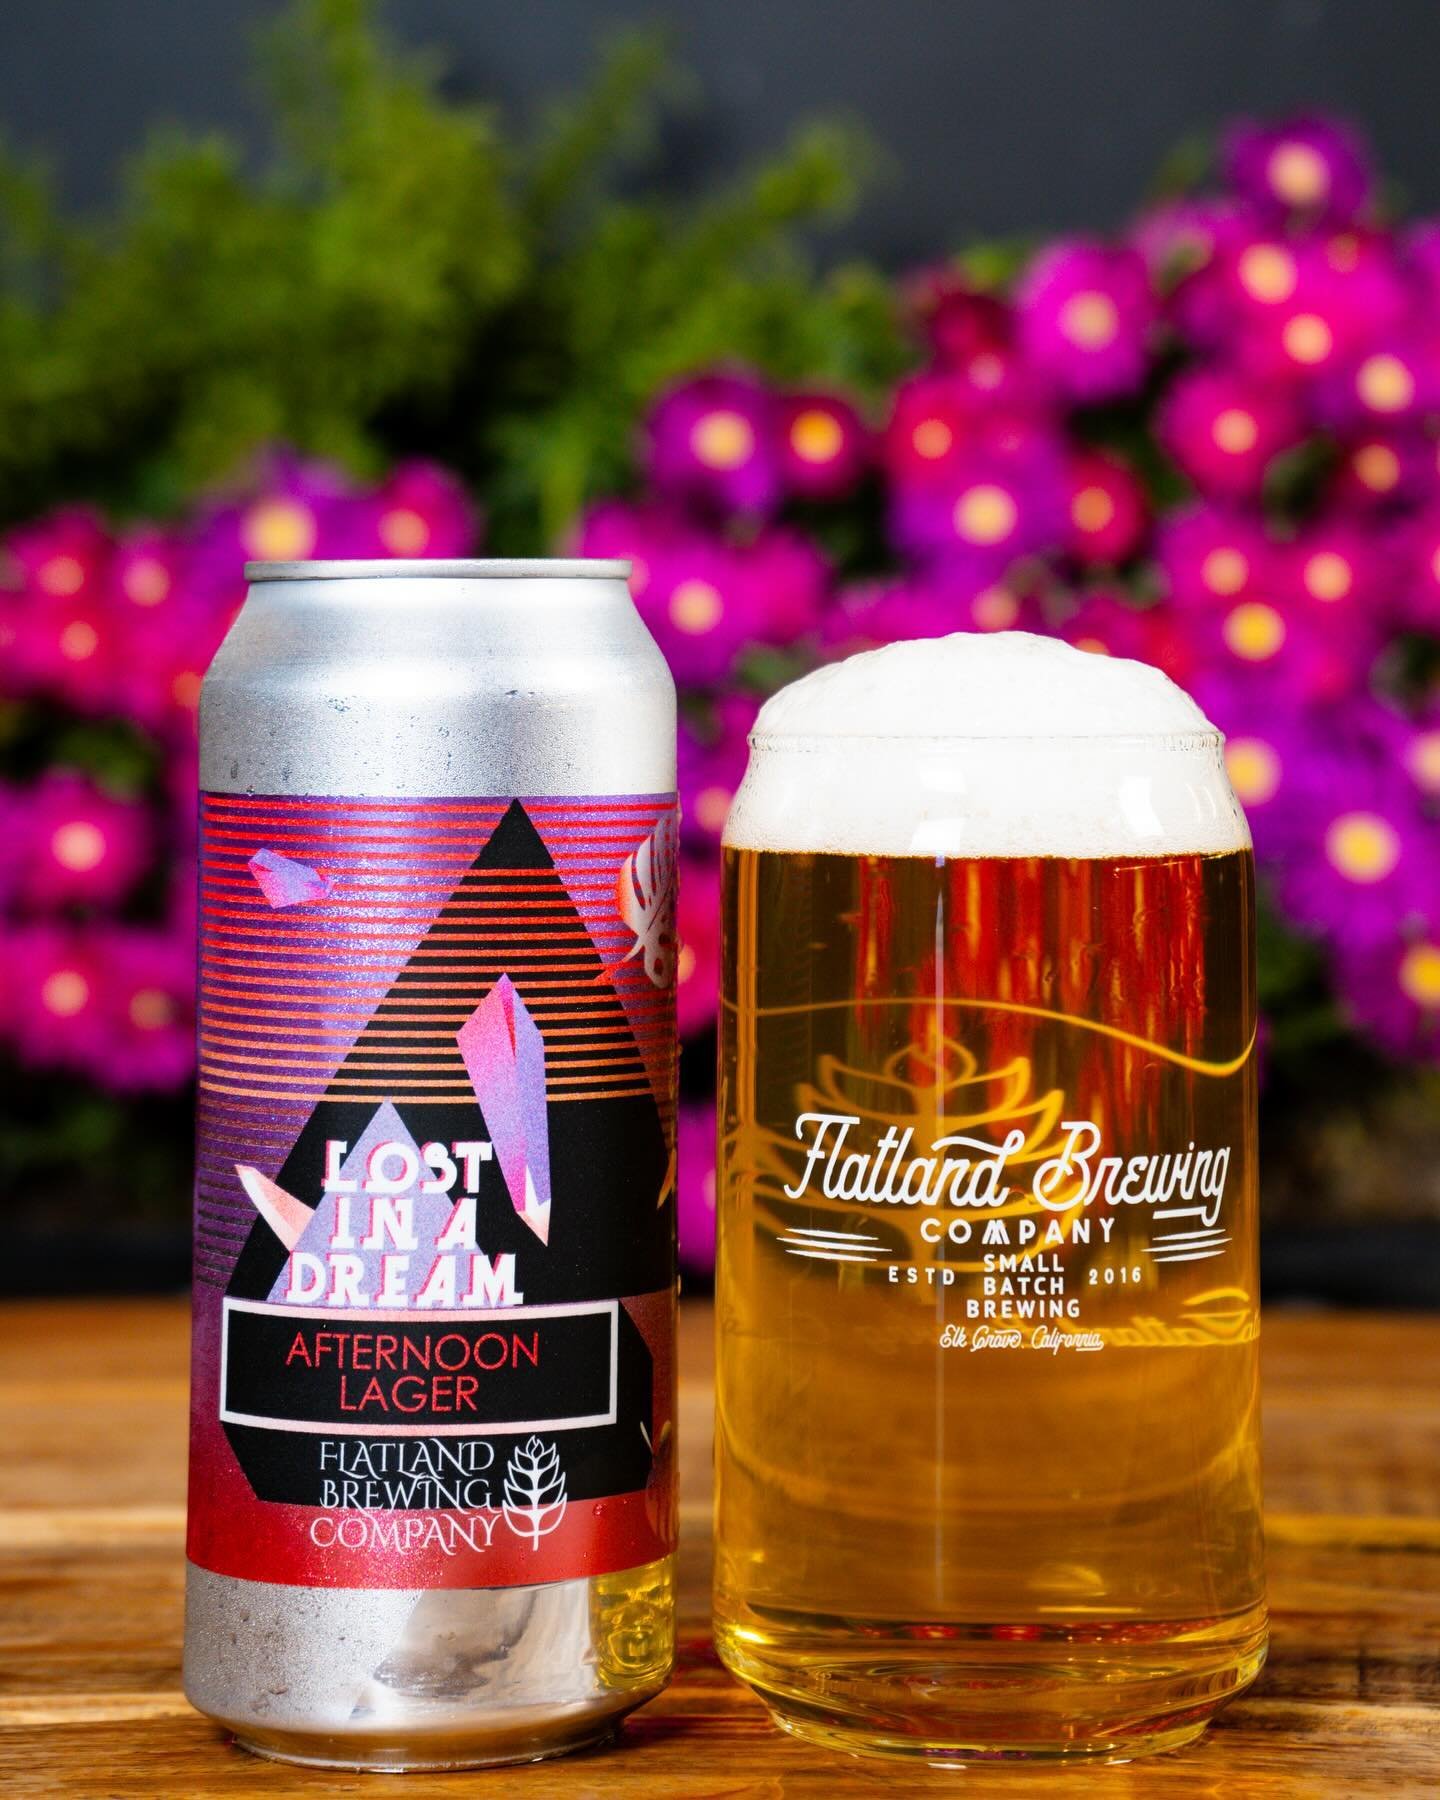 &ldquo;Lost In A Dream&rdquo; is a Lager that&rsquo;s light, full flavored and perfectly satisfying for any day drinker.&nbsp;🍻 It&rsquo;s ideal for those moments when you just want to kick back &amp; relax, but still need to get sh*t done.

#flatla